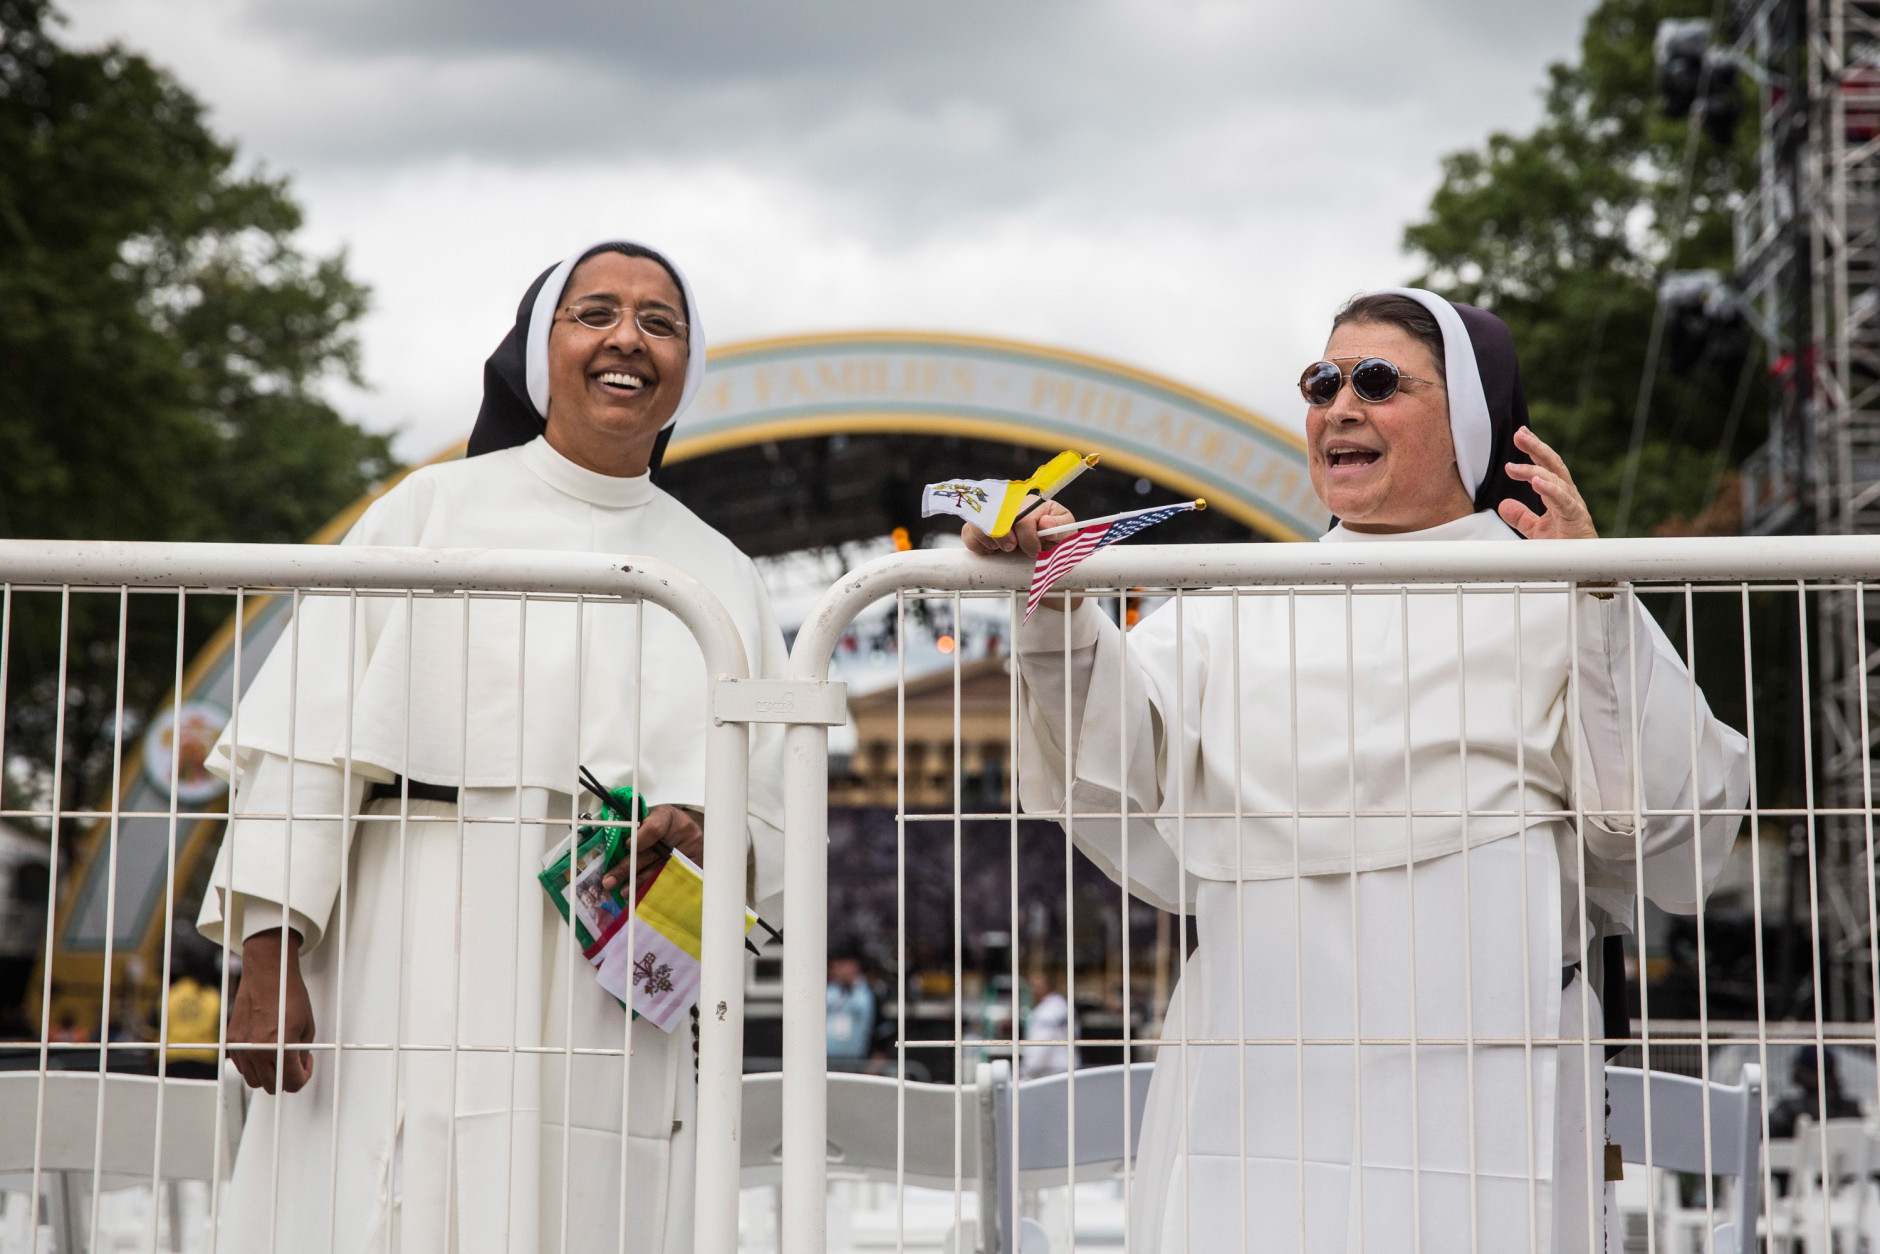 PHILADELPHIA, PA - SEPTEMBER 26: Sister Mary Celeste (L) and Sister Mary Rose of Nashville, TN wait for Pope Francis to arrive at the World Festival of Families on September 26, 2015 in Philadelphia, Pennsylvania. The Pope is concluding his U.S. tour by spending two days in Philadelphia; he previously visited Washington D.C. and New York City. (Photo by Andrew Burton/Getty Images)